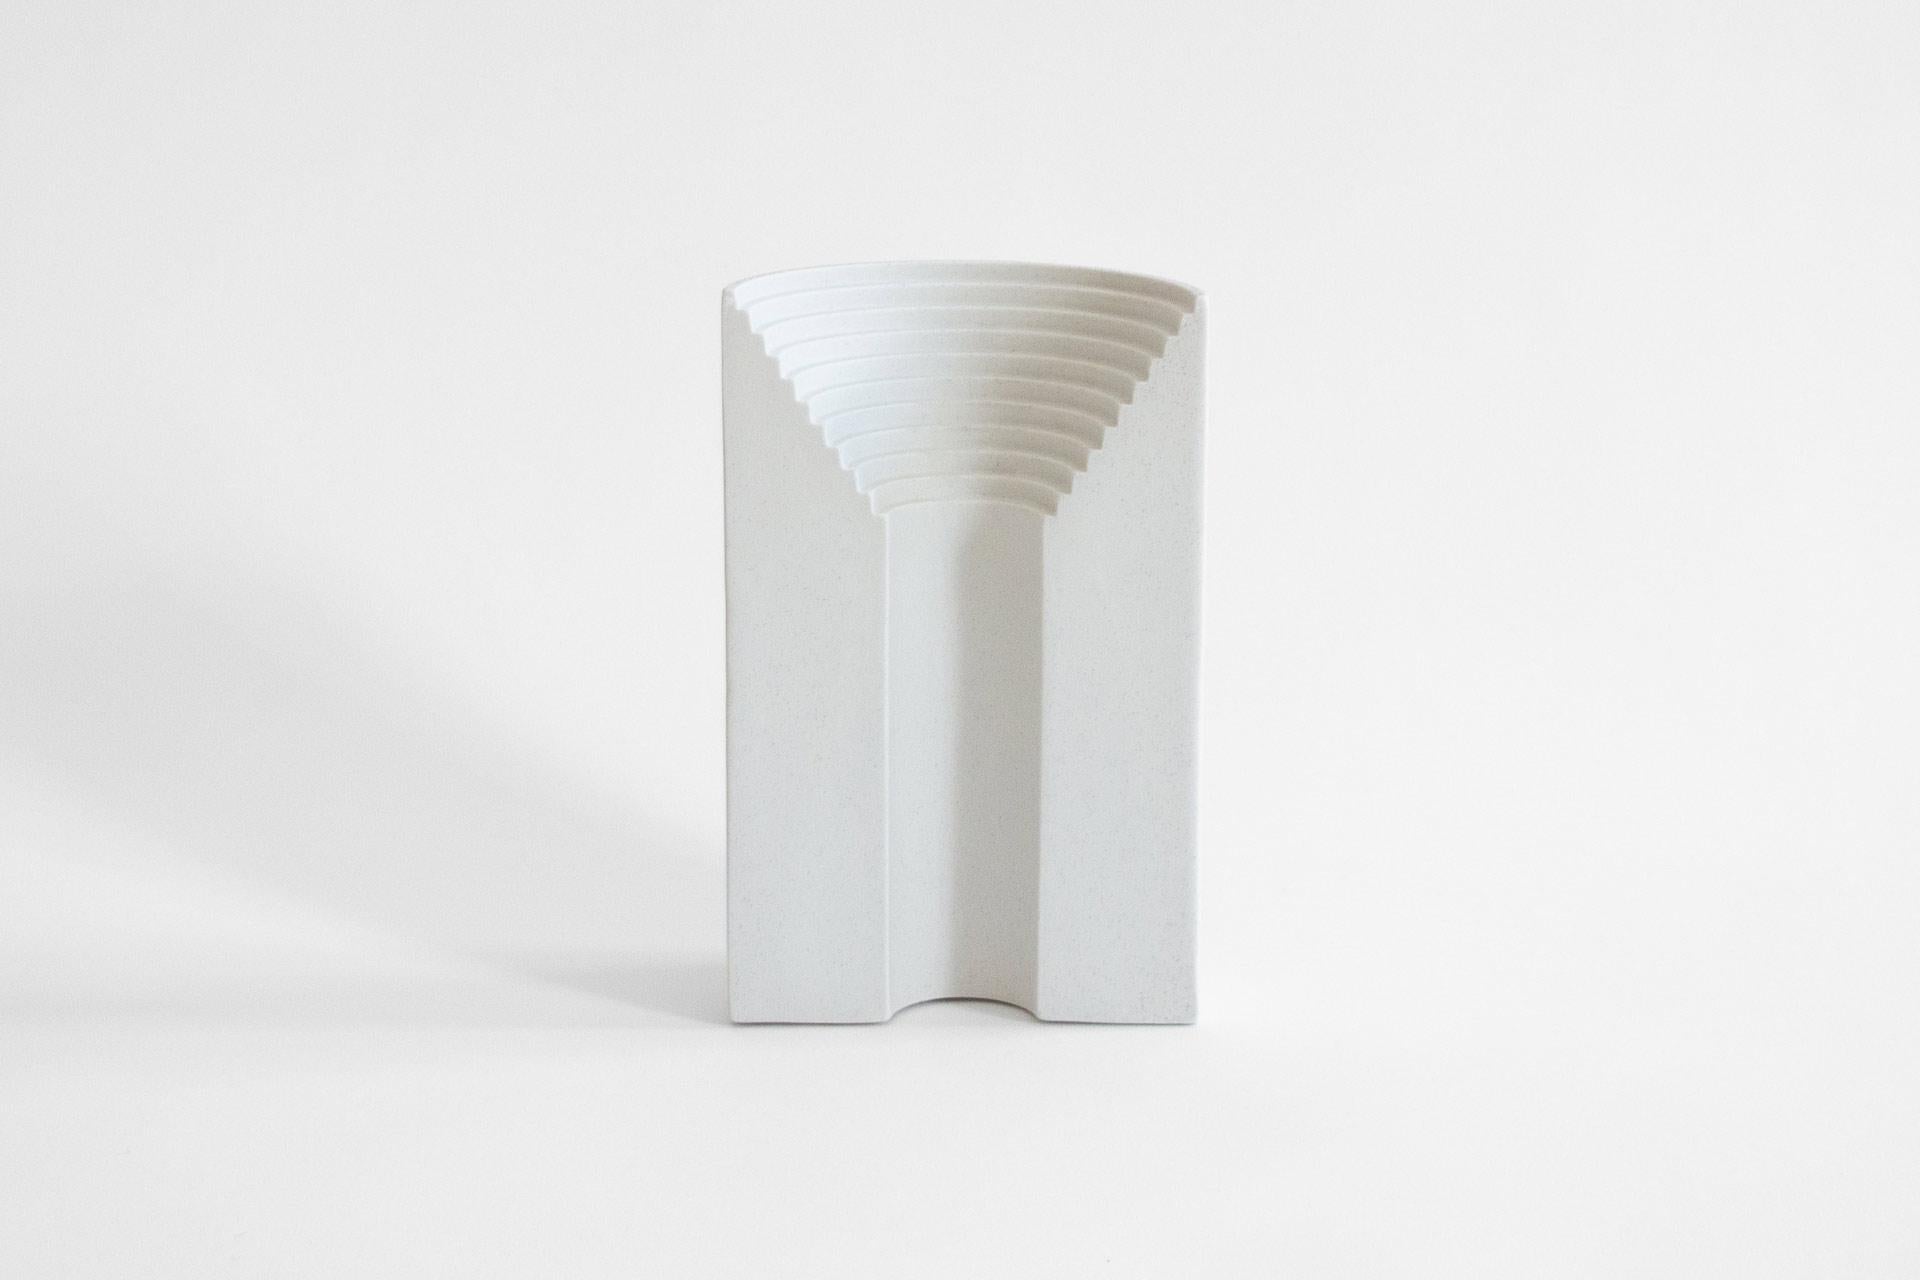 The Ark vase is a result of the fascination for architectural elements - staircases, archways, the rhythm and repetitive aspect of classical architecture. It represents the beauty of architectural details as individual archetypes, while still